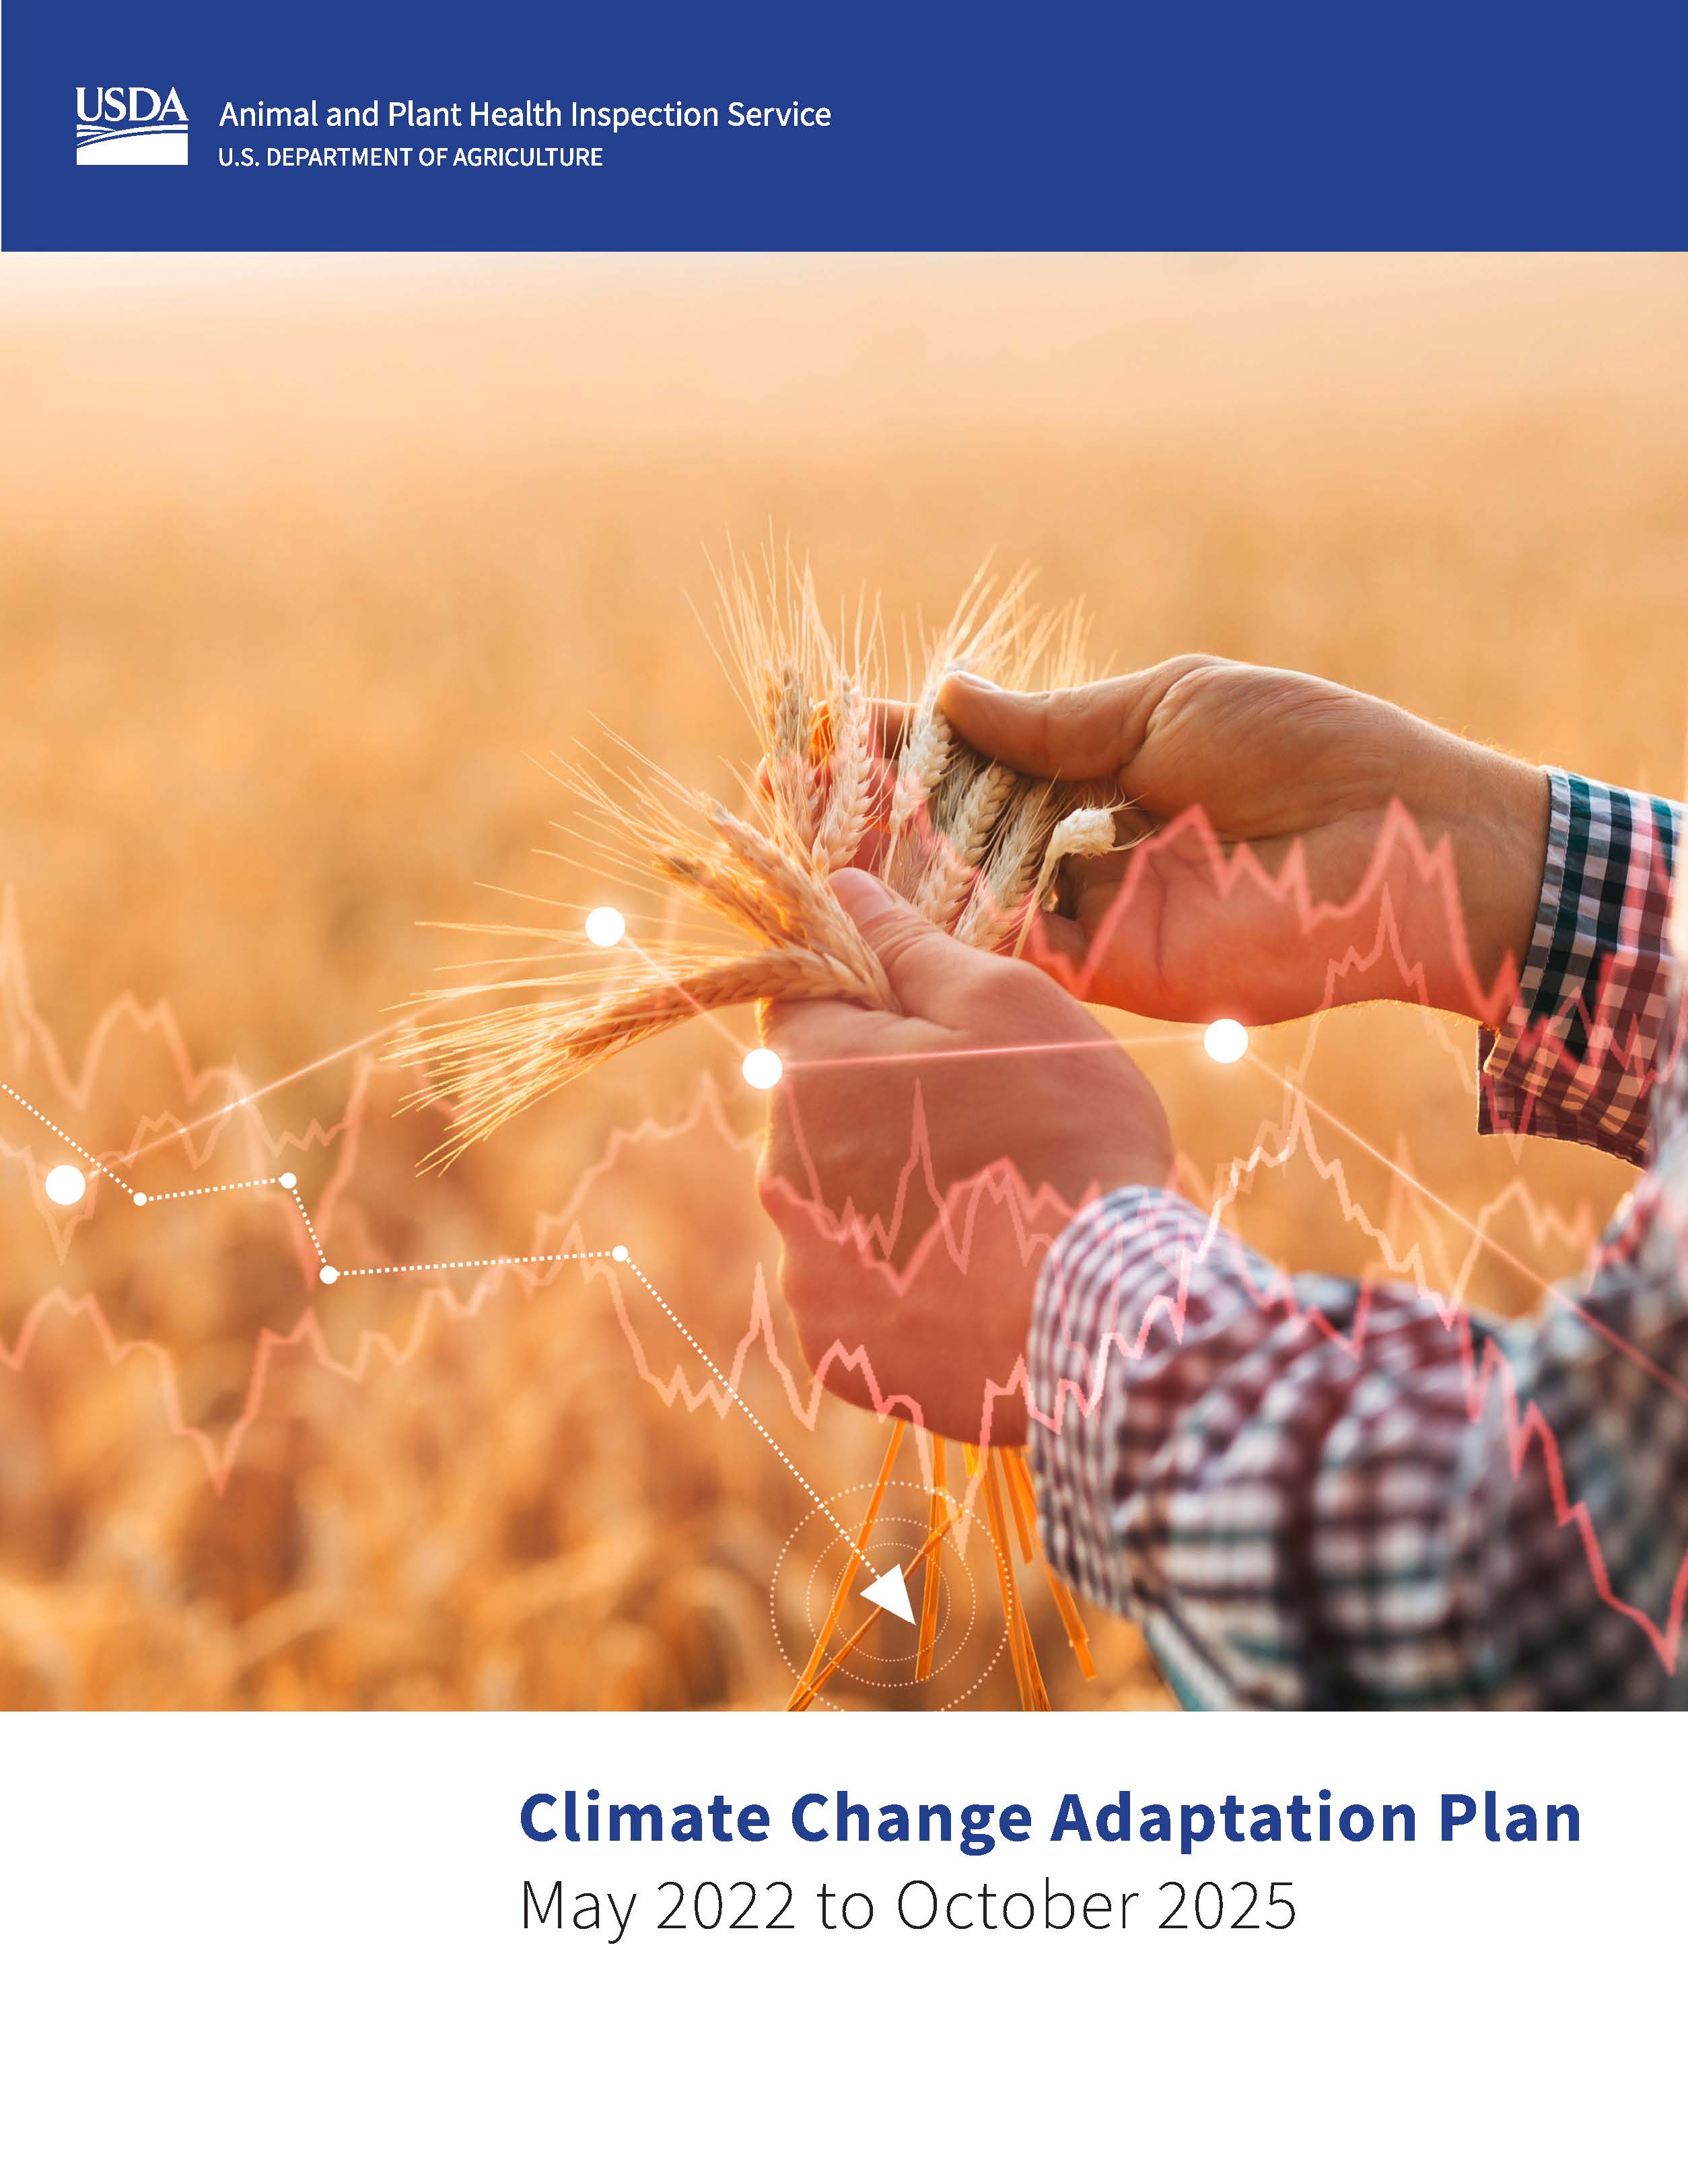 Cover page for the 2022 APHIS Action Plan for Climate Adaptation and Resilience, hands holding wheat in a field.